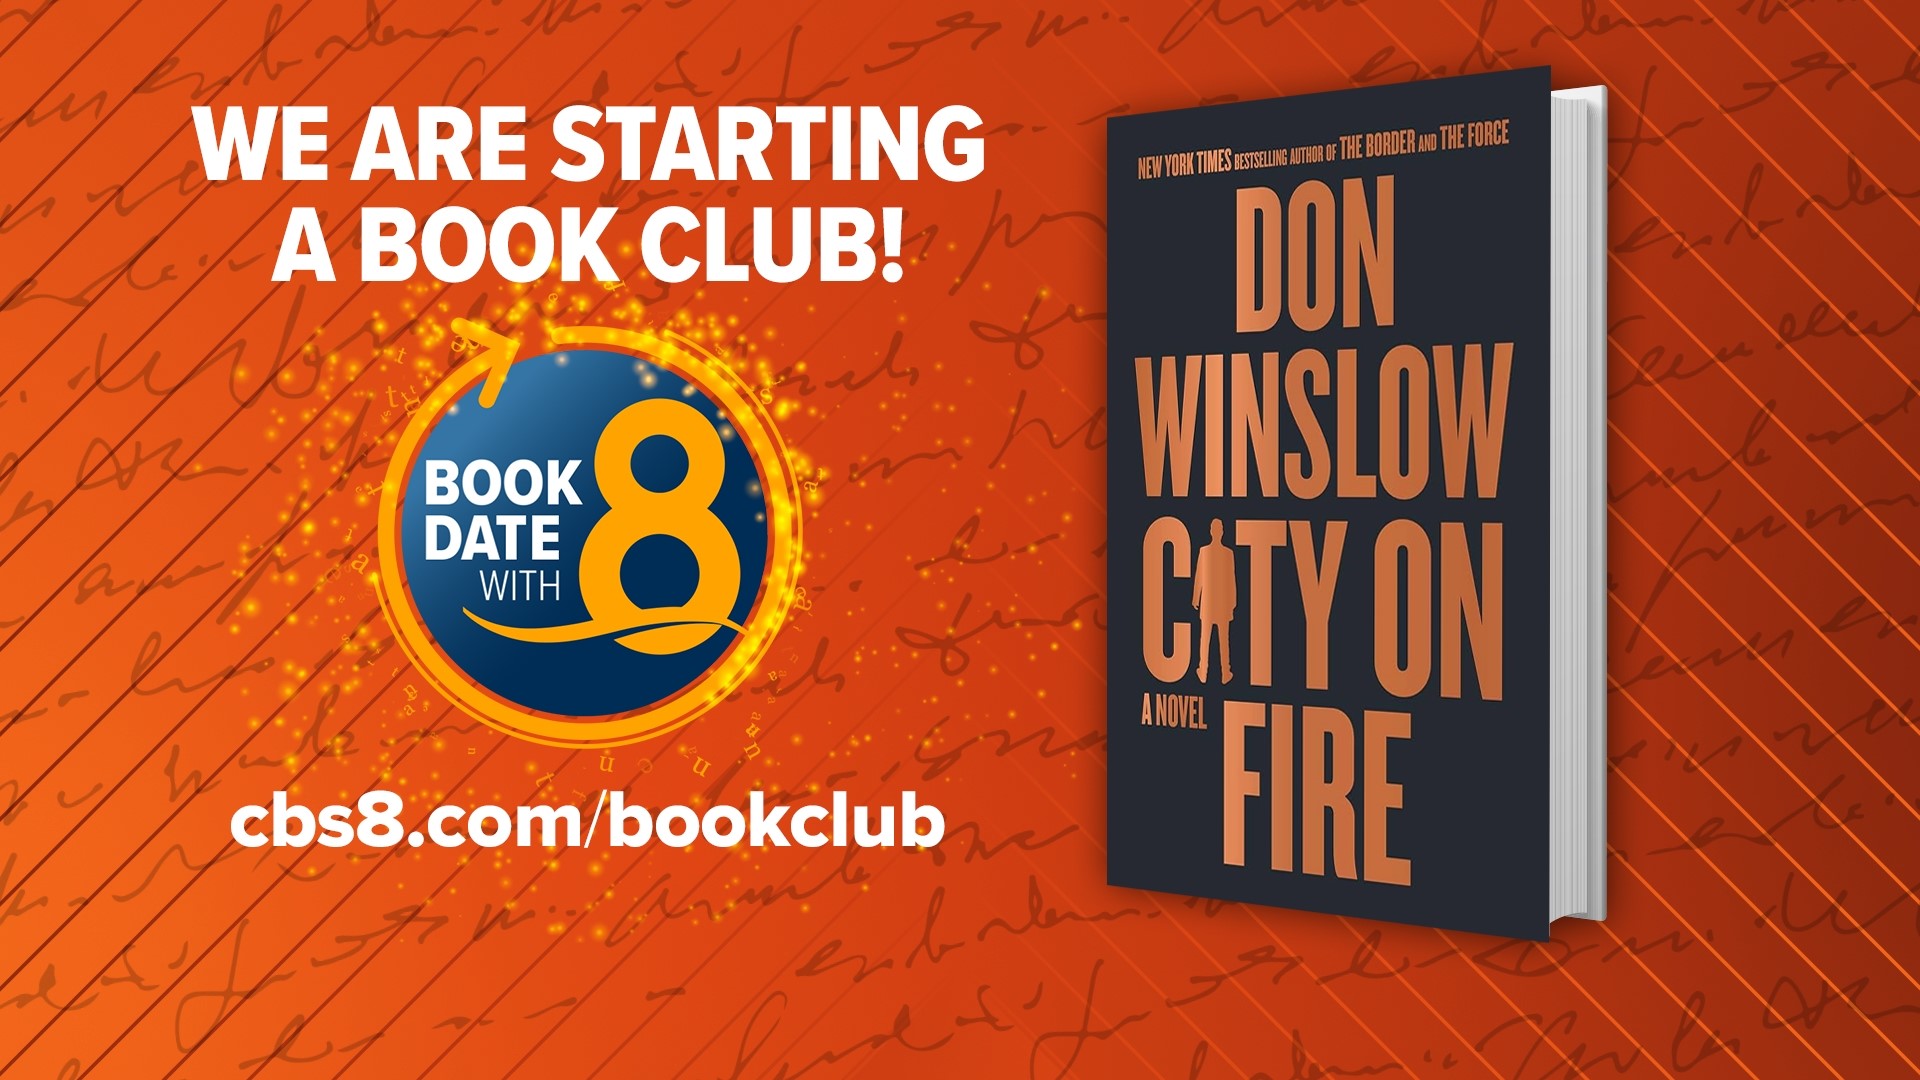 Spoiler alert: This video features an interview with author Don Winslow and will reveal details of the book.